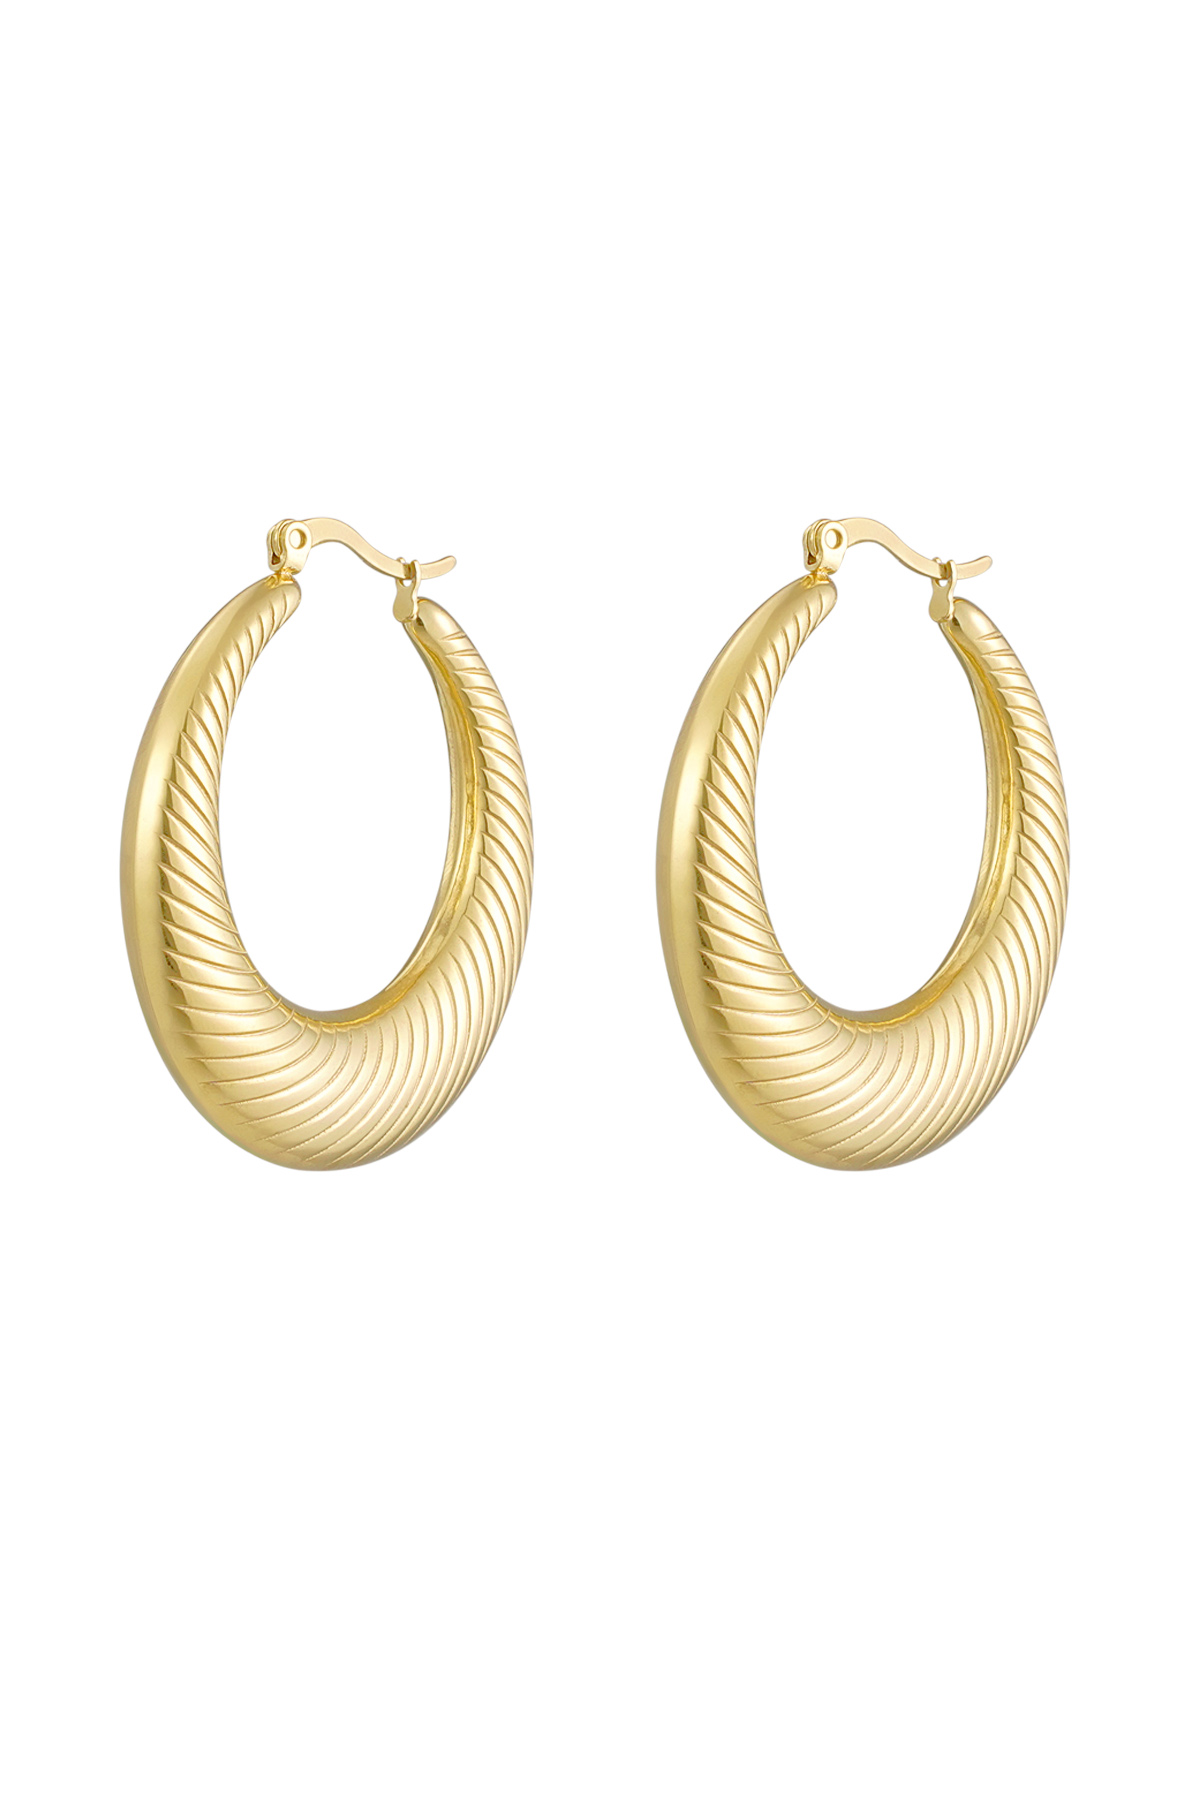 Earrings round striped - gold h5 